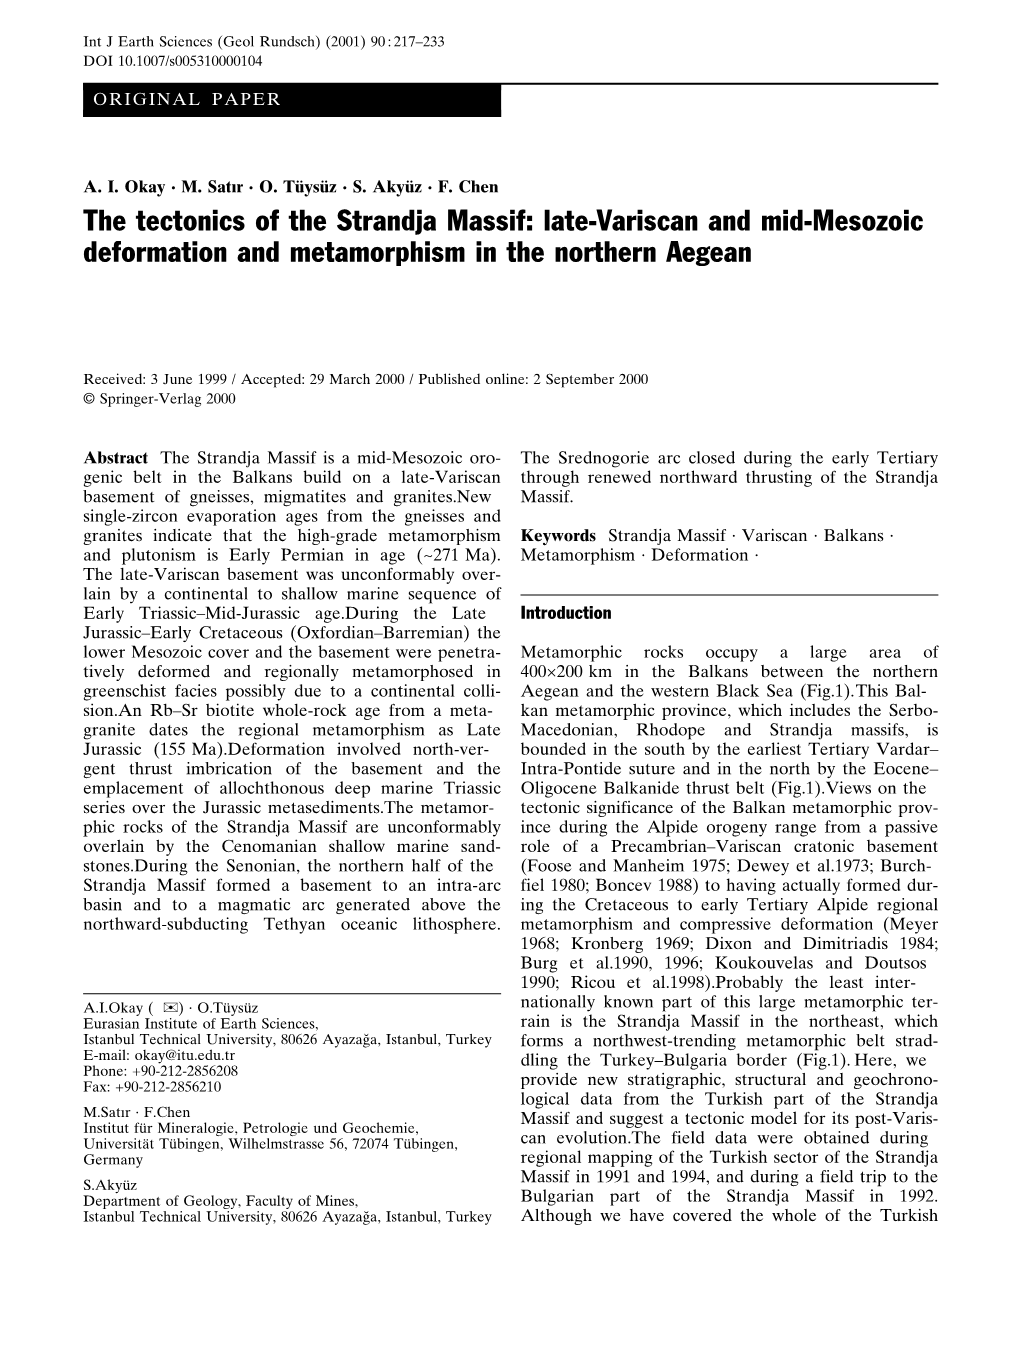 The Tectonics of the Strandja Massif: Late-Variscan and Mid-Mesozoic Deformation and Metamorphism in the Northern Aegean